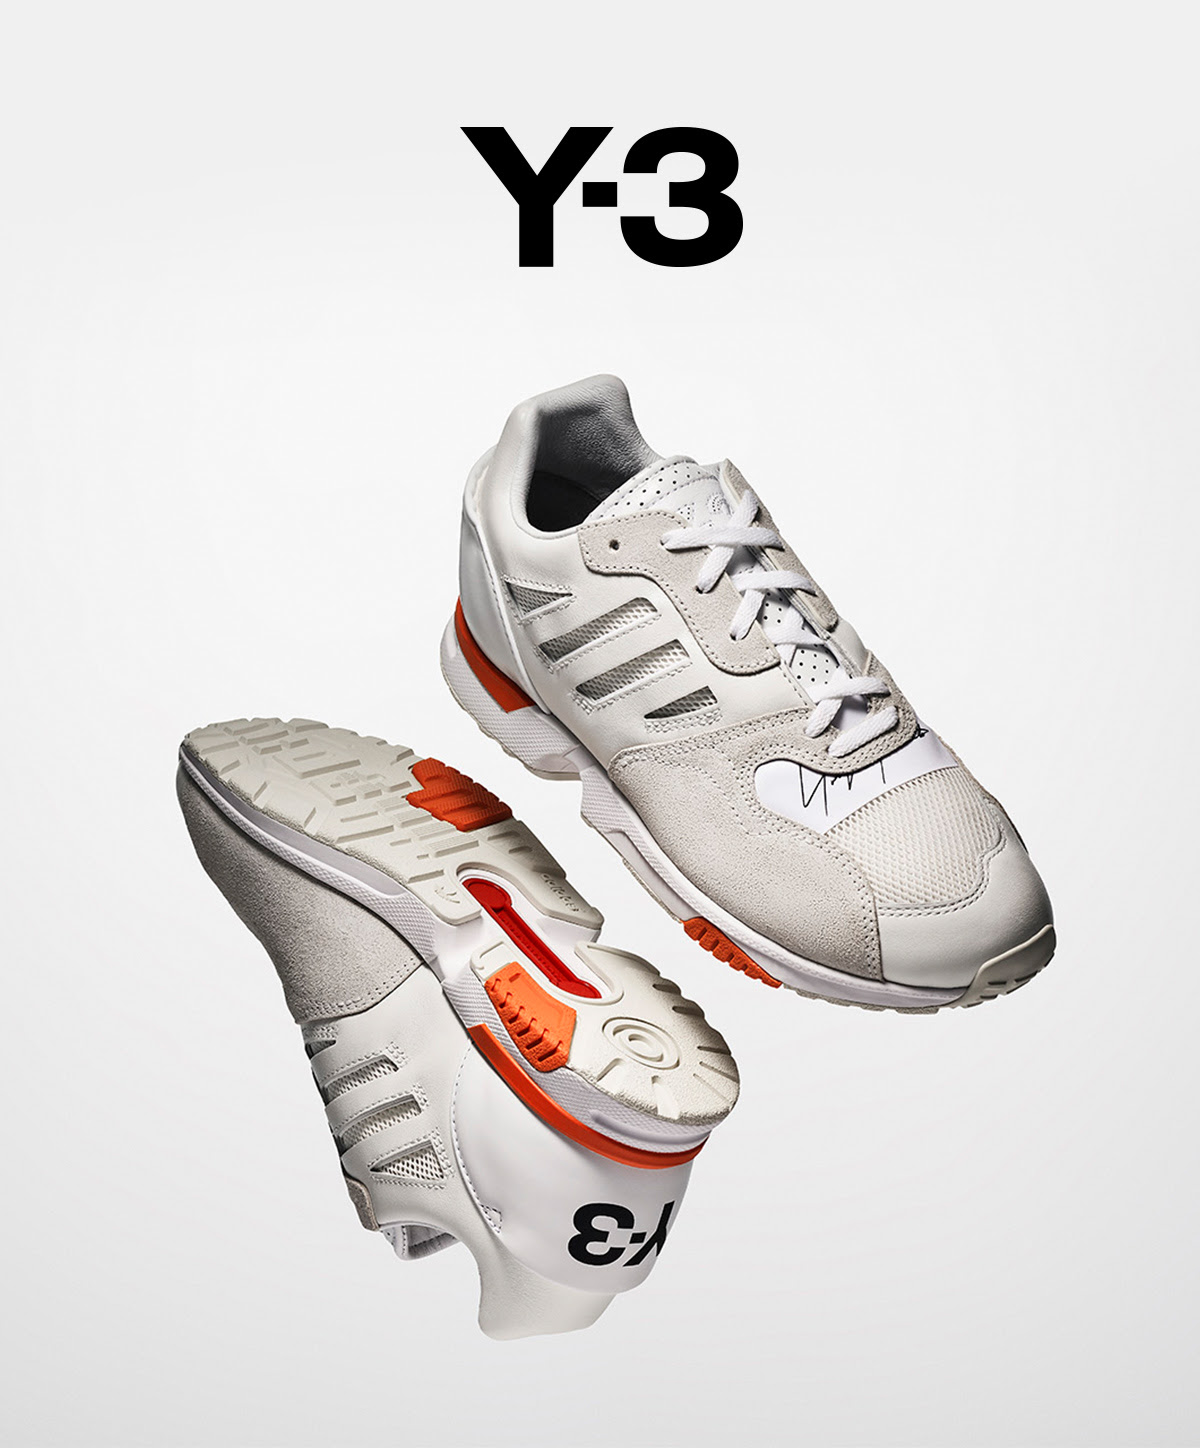 Y-3 Online Store - Y-3 ZX RUN: Available Now